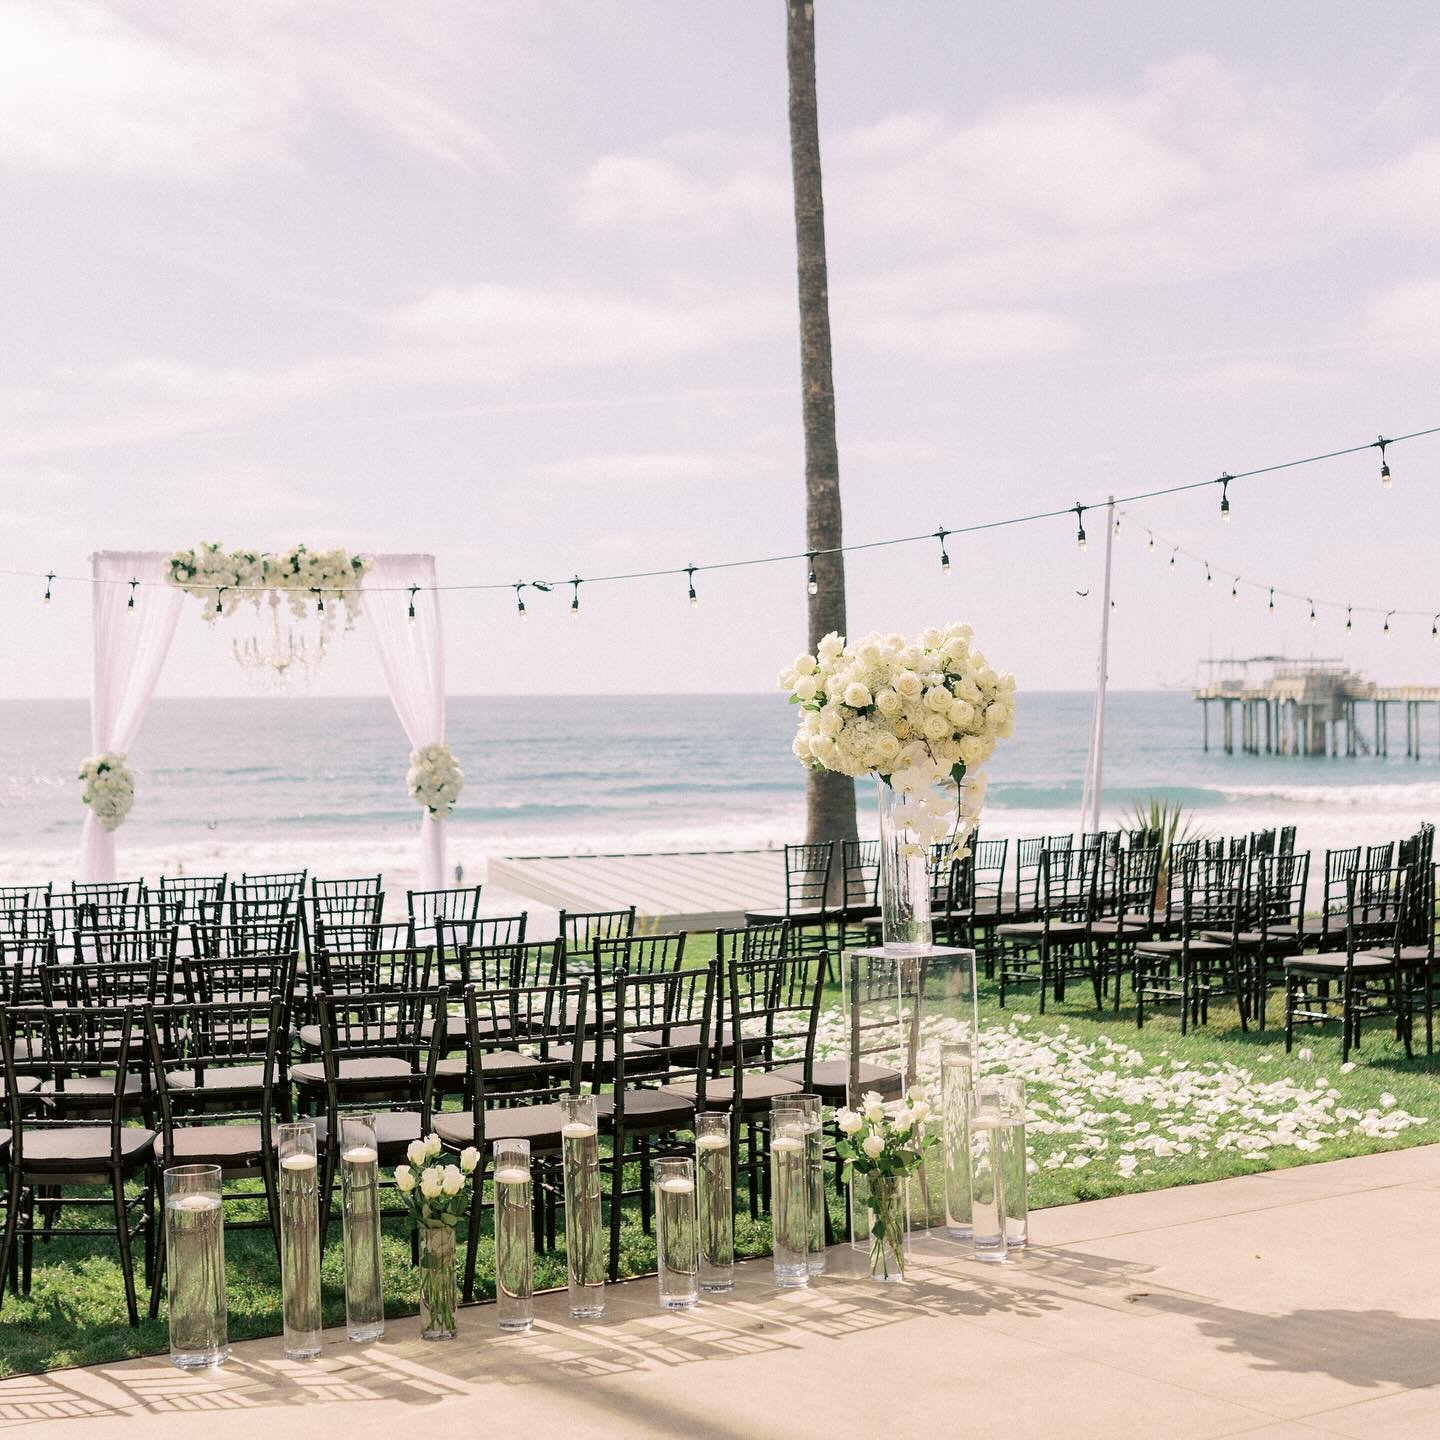 Still living through this beautiful beach front wedding 🌊✨

Wedding Planning &amp; Design @taylordeckerevents 
Venue #scrippsseasideforum 
Catering @wildthymeco 
Bartending @giuseppernfc 
Photography @christineskariphotography 
Videography @shoreand